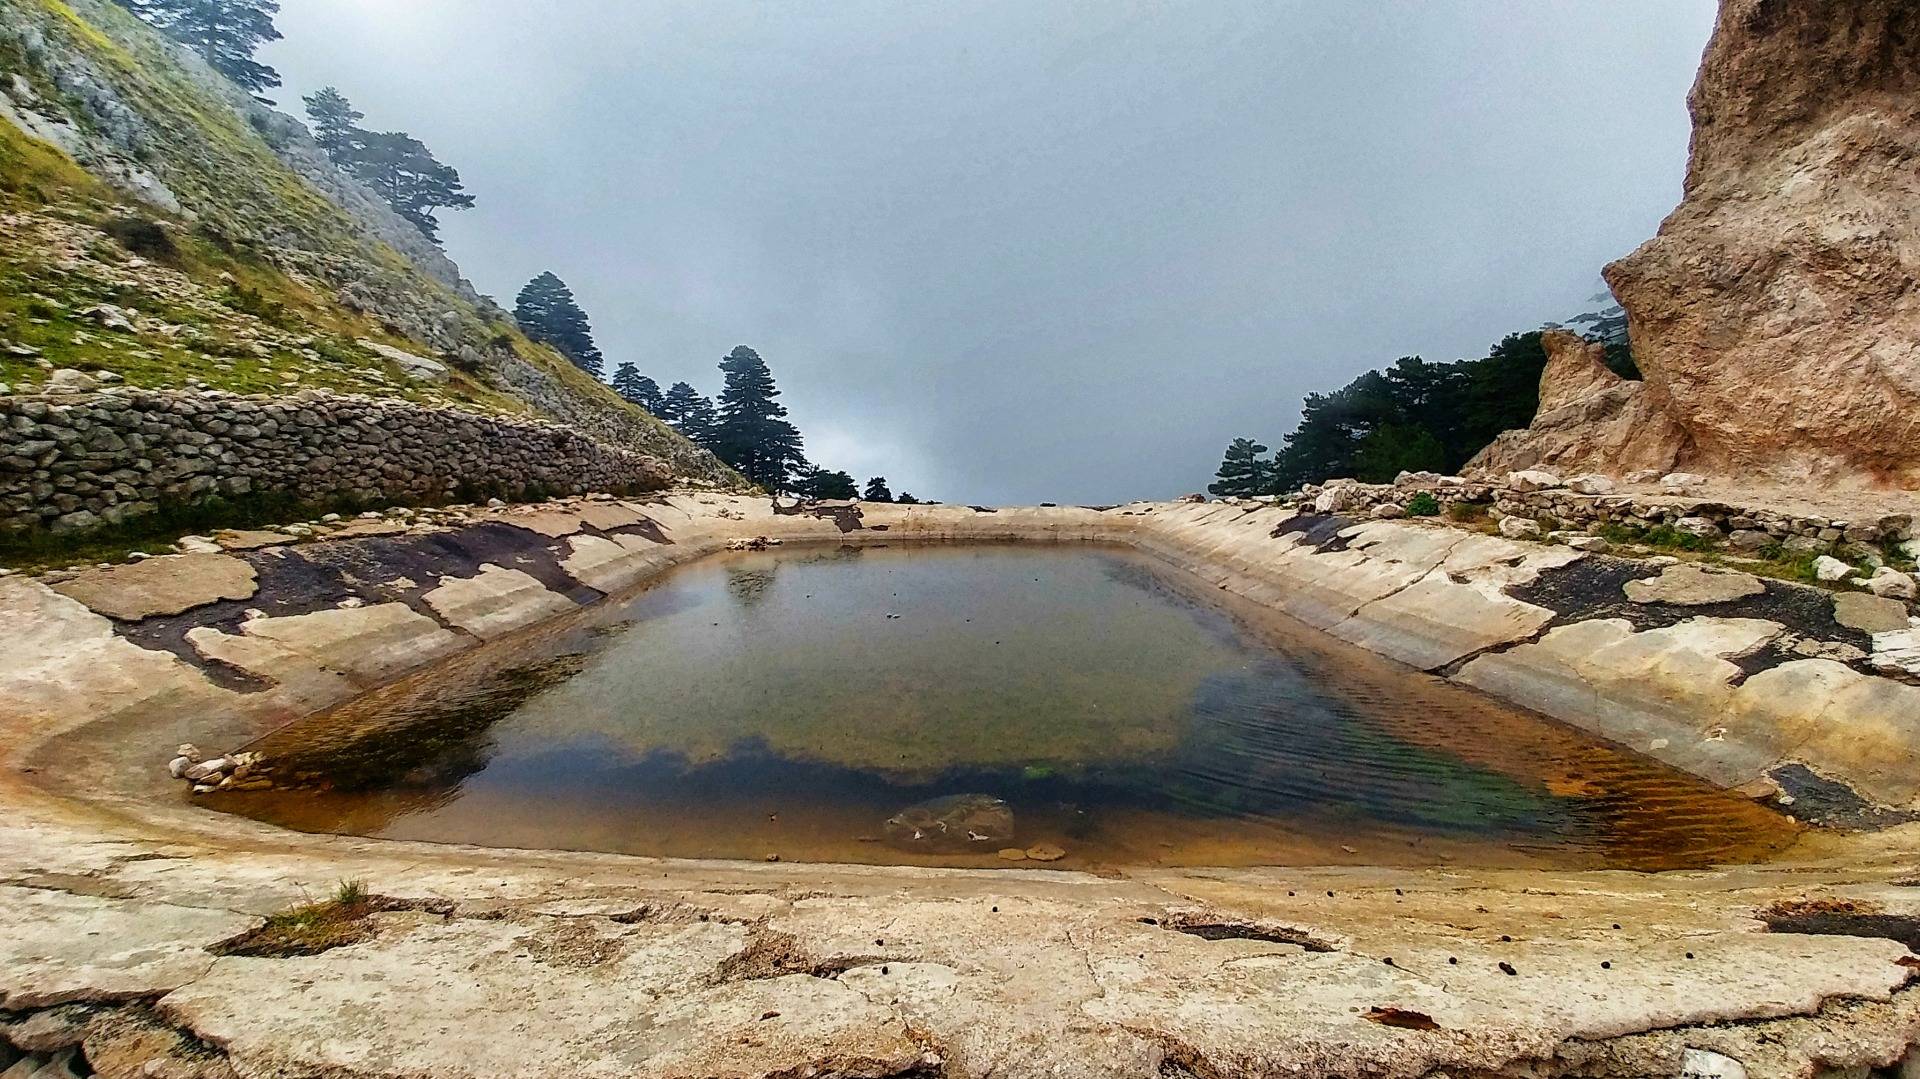 A pool under the sky. It’s located direct on the pass